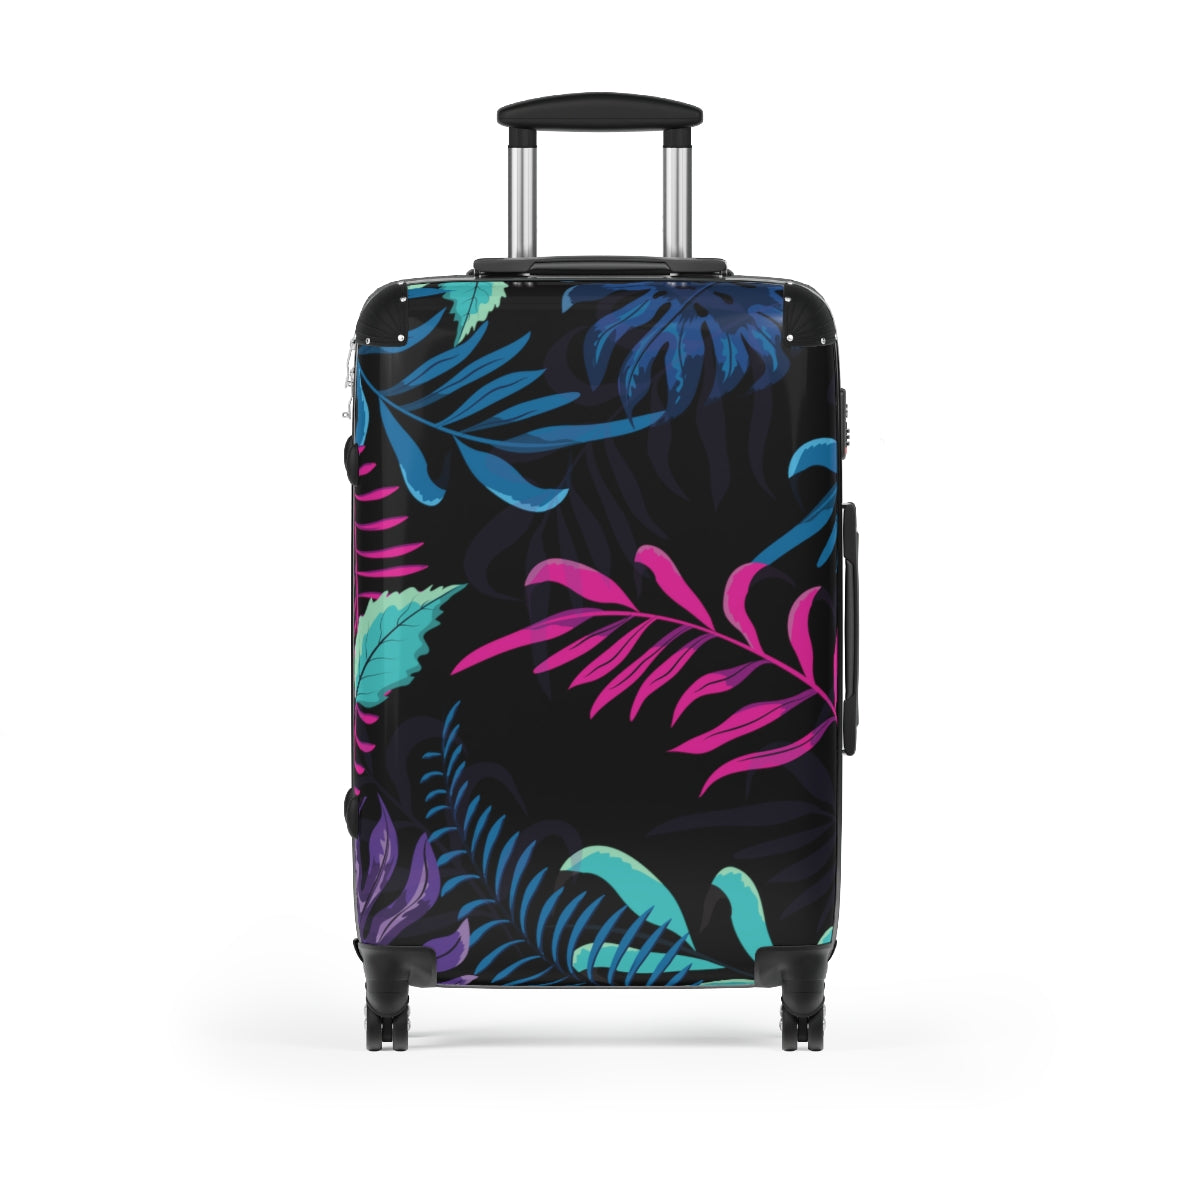 BEST CARRY-ON LUGGAGE SET, TROPICAL SUMMER DESIGN BY ARTZIRA, CABIN SUICASE FOR GIRLS, WOMEN, GIFT FOR BRIDESMAIDS, GIFT FOR MOTHERS, DOUBLE WHEELED SPINNER